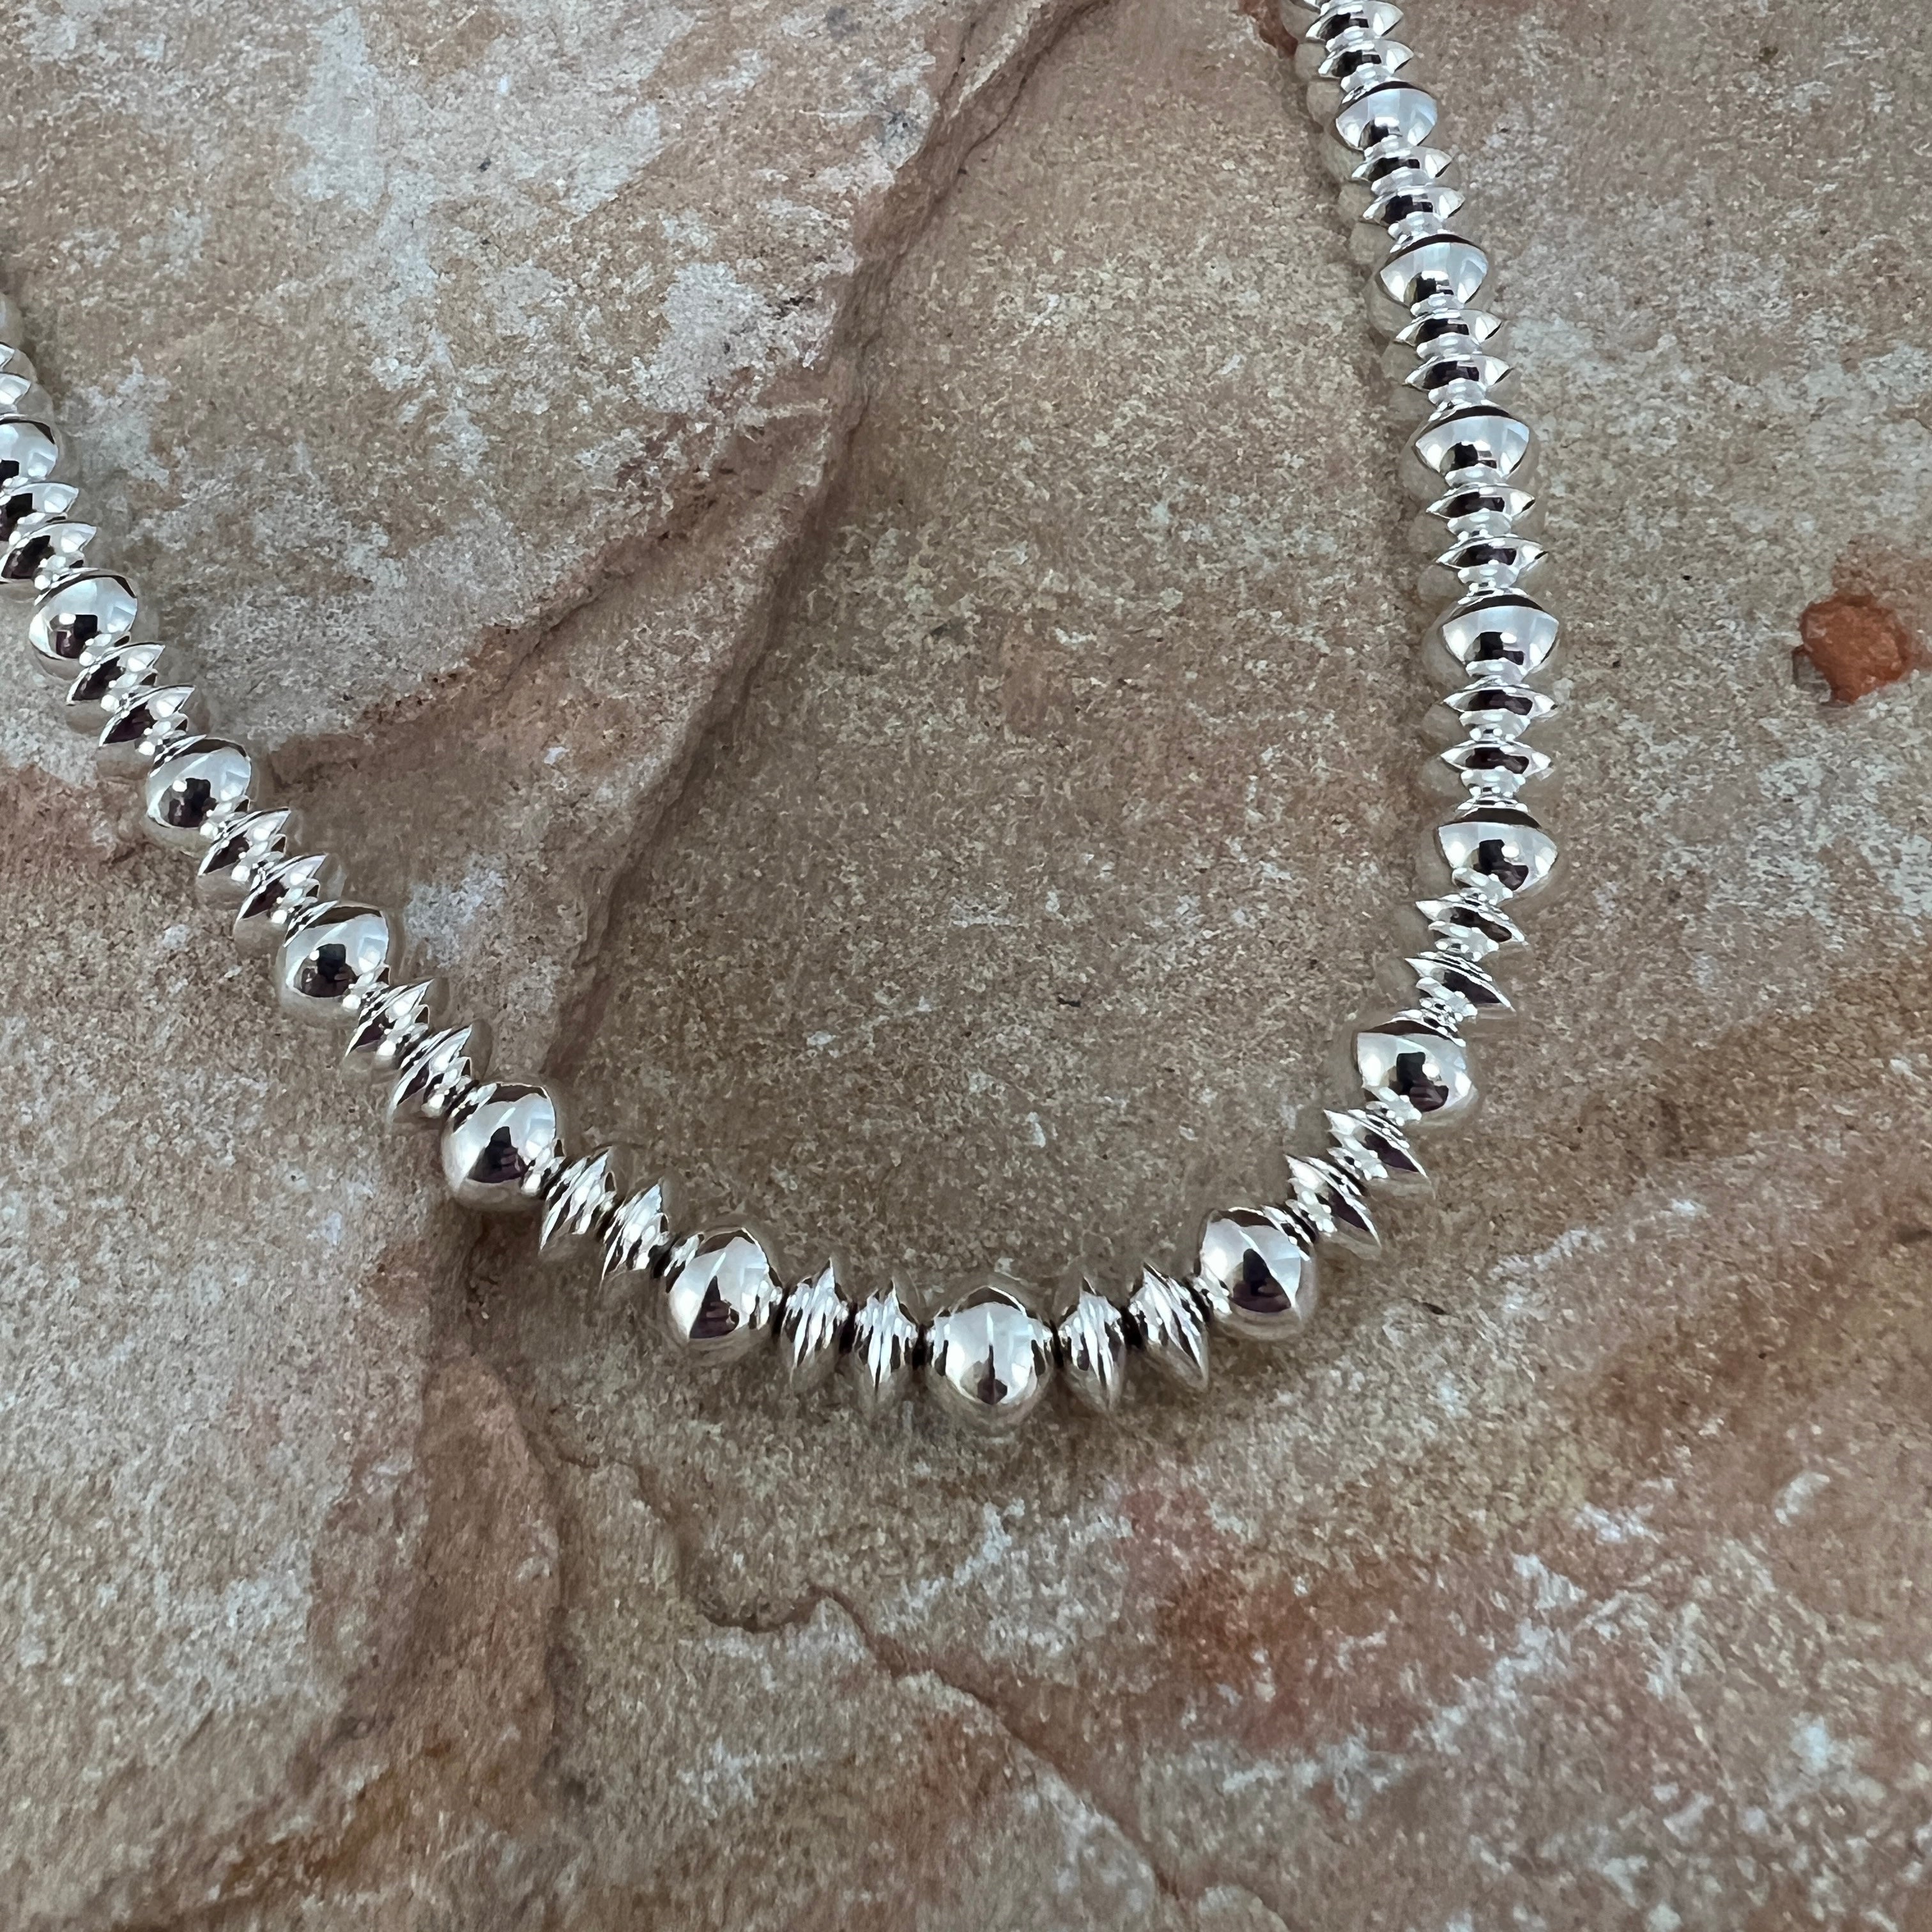 17 Single Strand Sterling Silver Navajo Pearls Beaded Necklace by Art